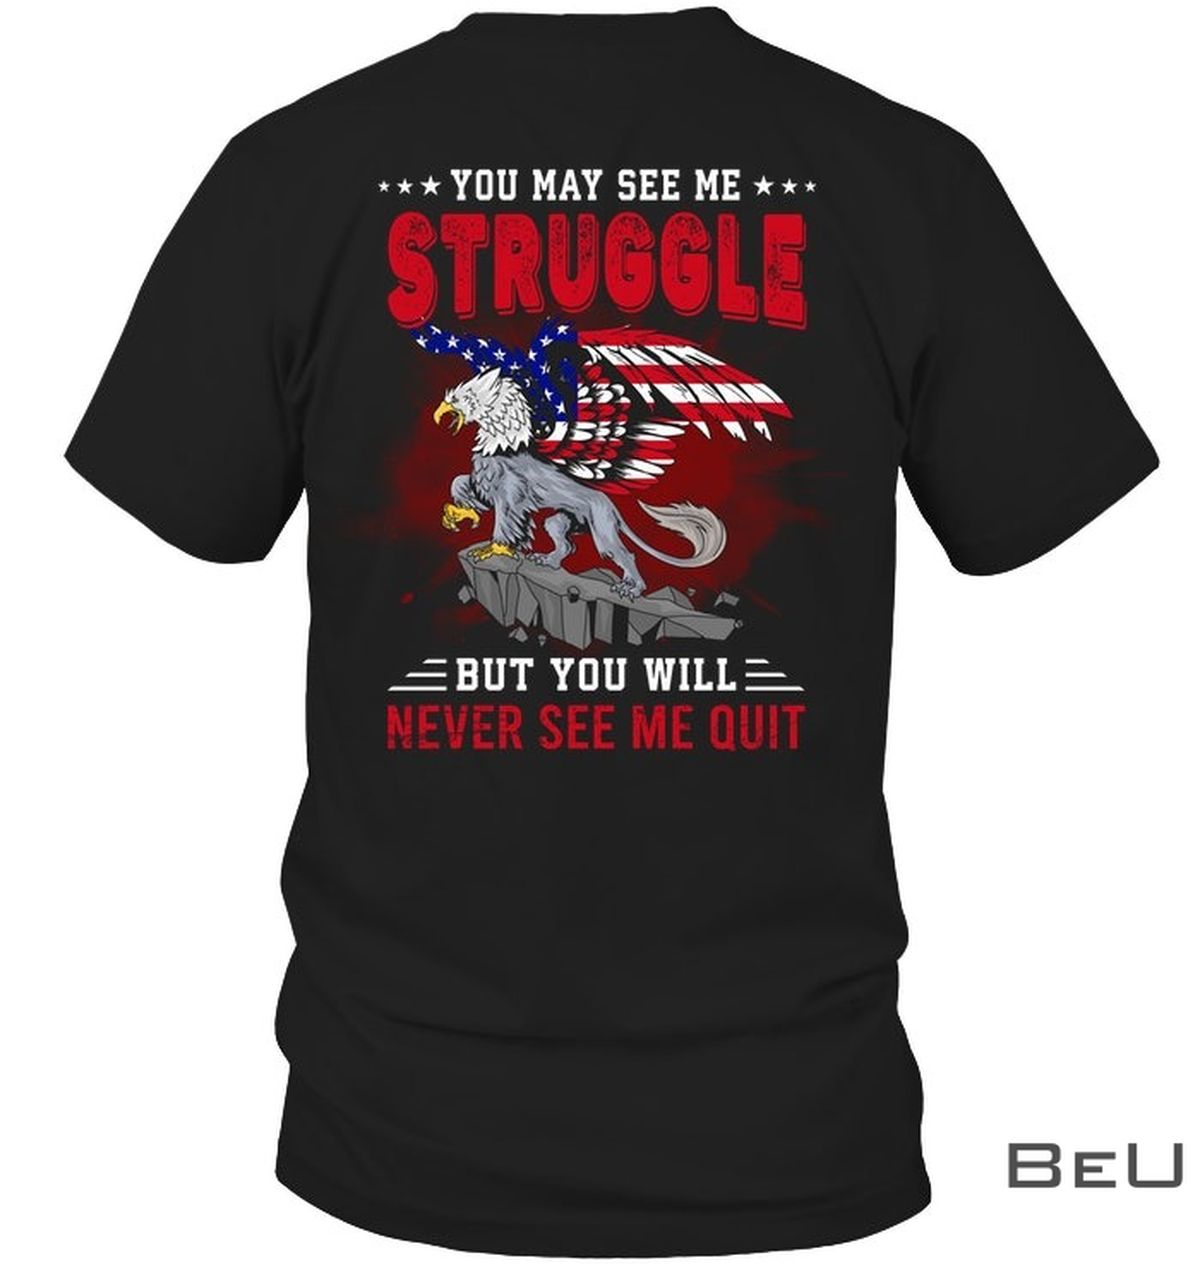 You-May-See-Me-Struggle-But-You-Will-Never-See-Me-Quit-Shirt-c